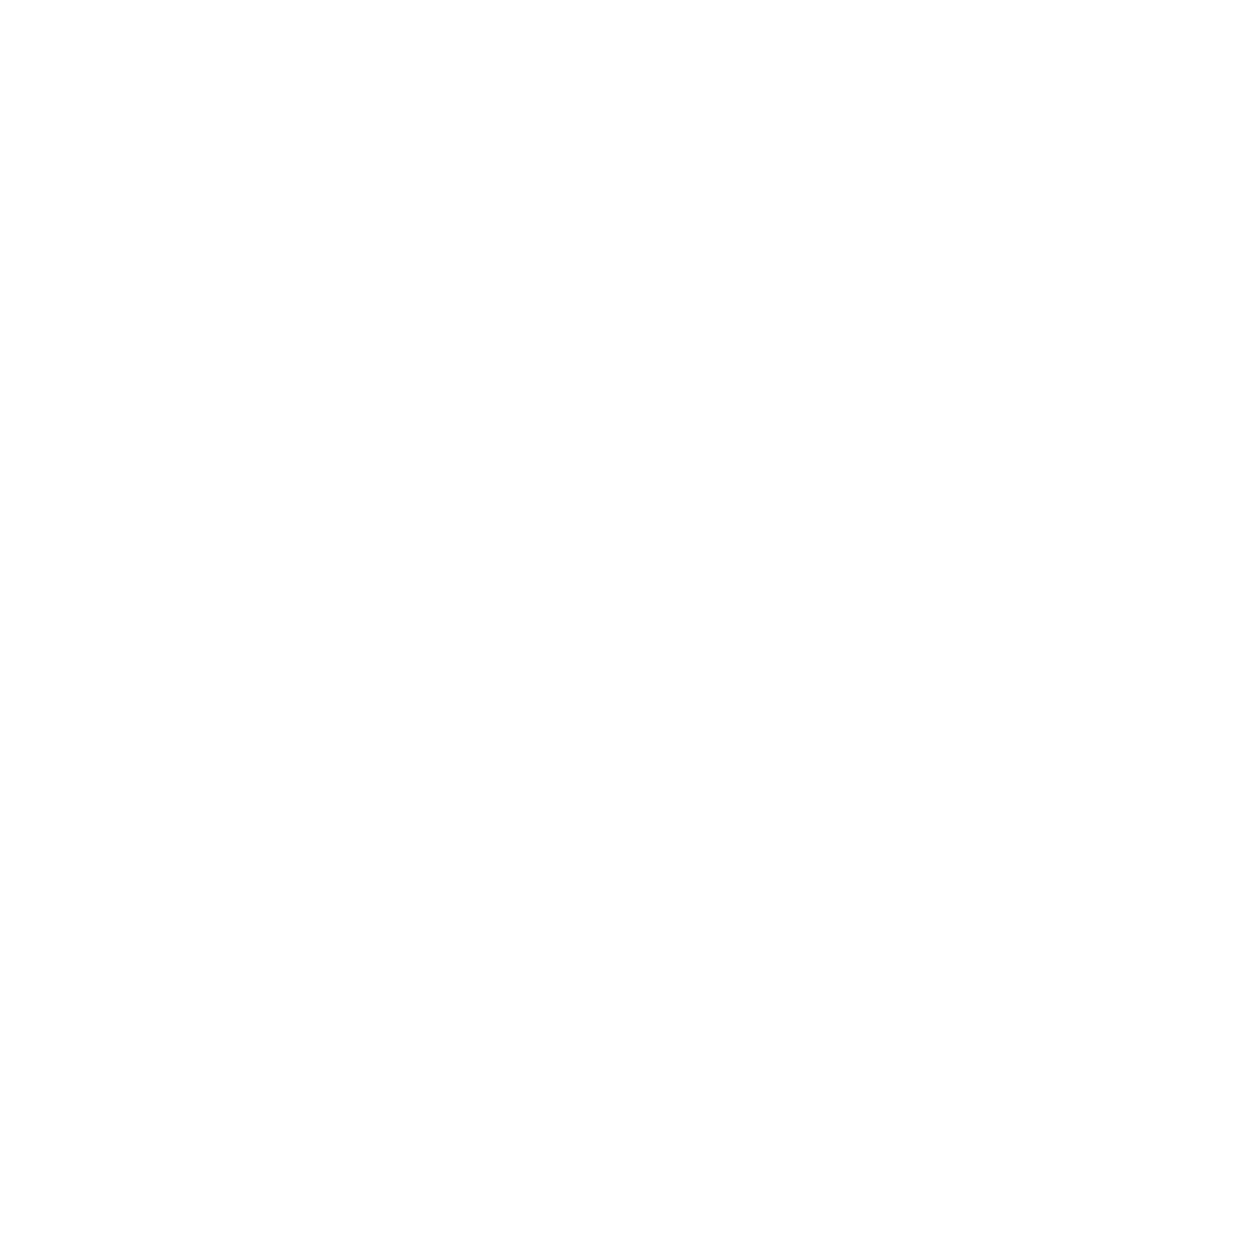 W.S. Newell & Sons, Inc.